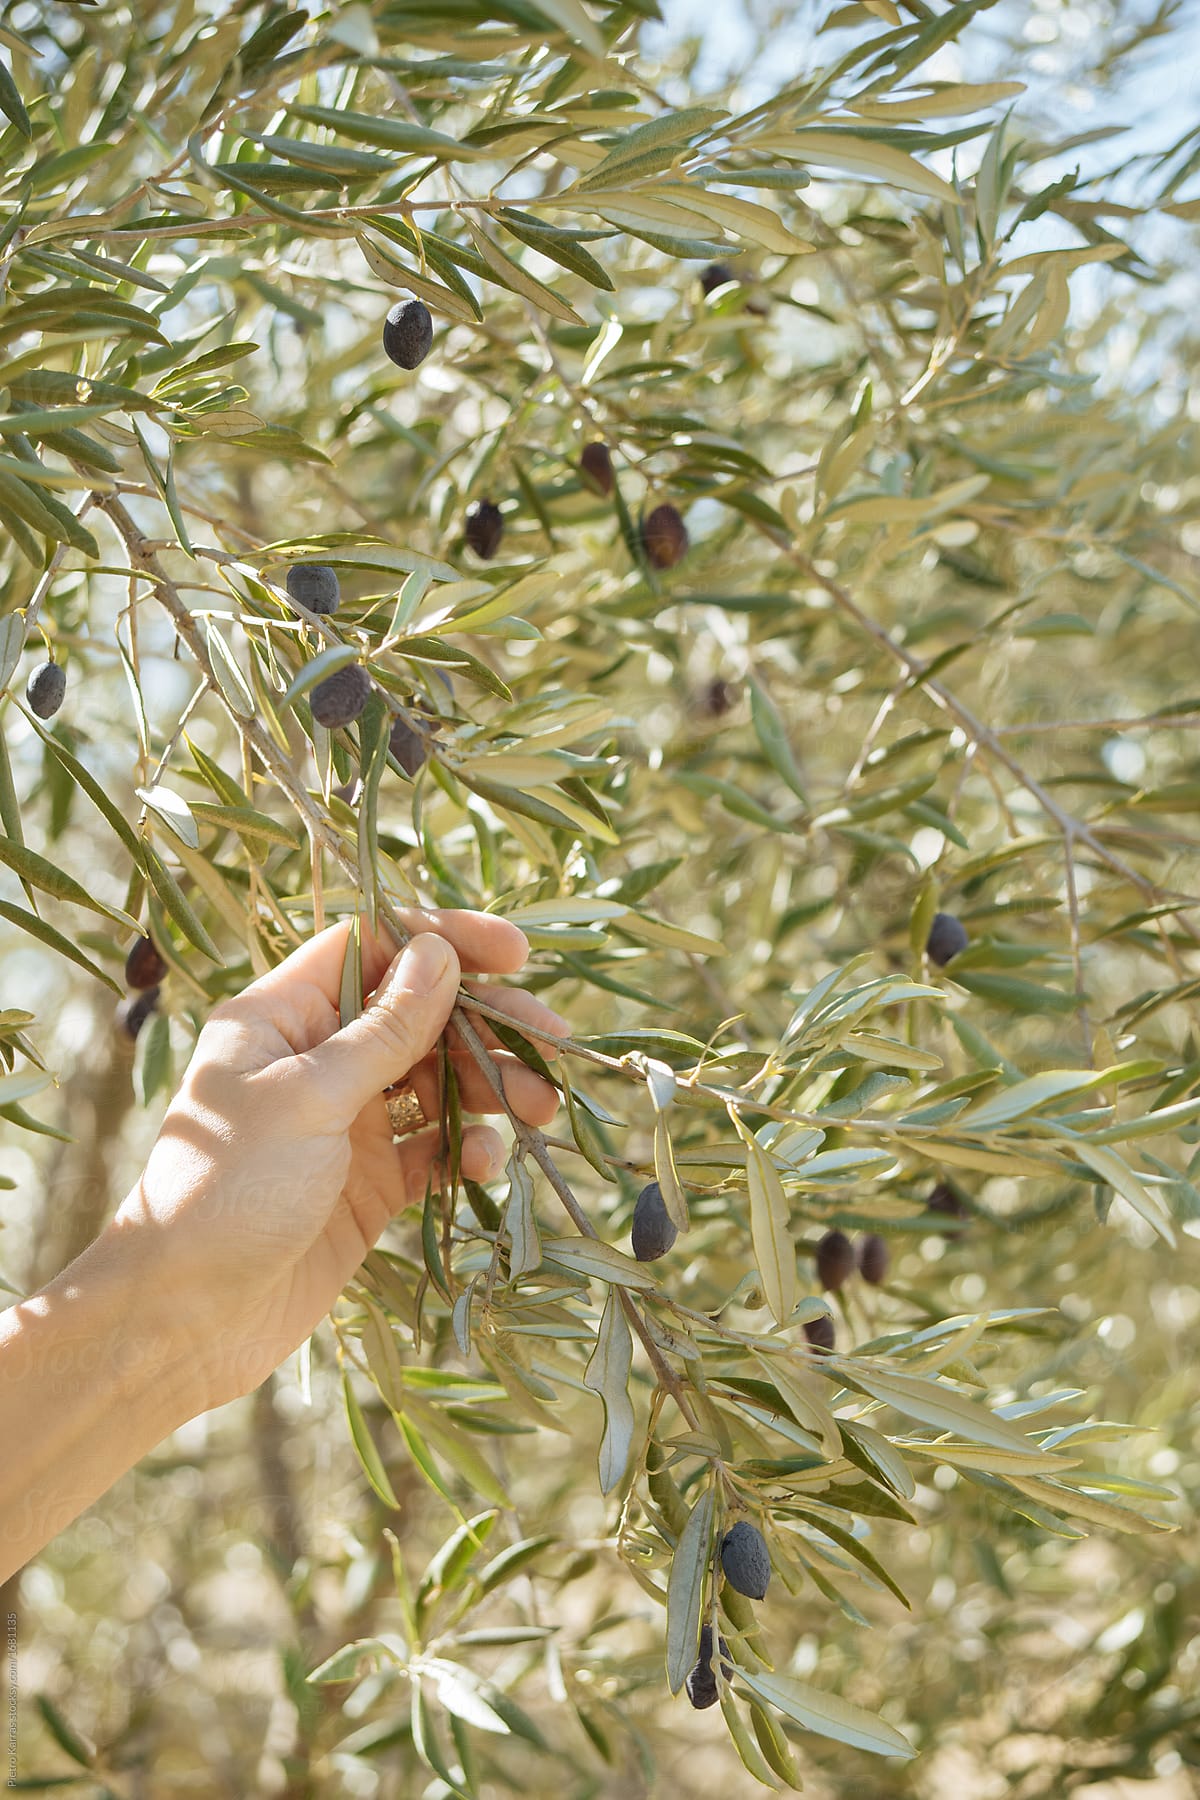 unidentified person holing blanches and picking olive fruits from olive tree